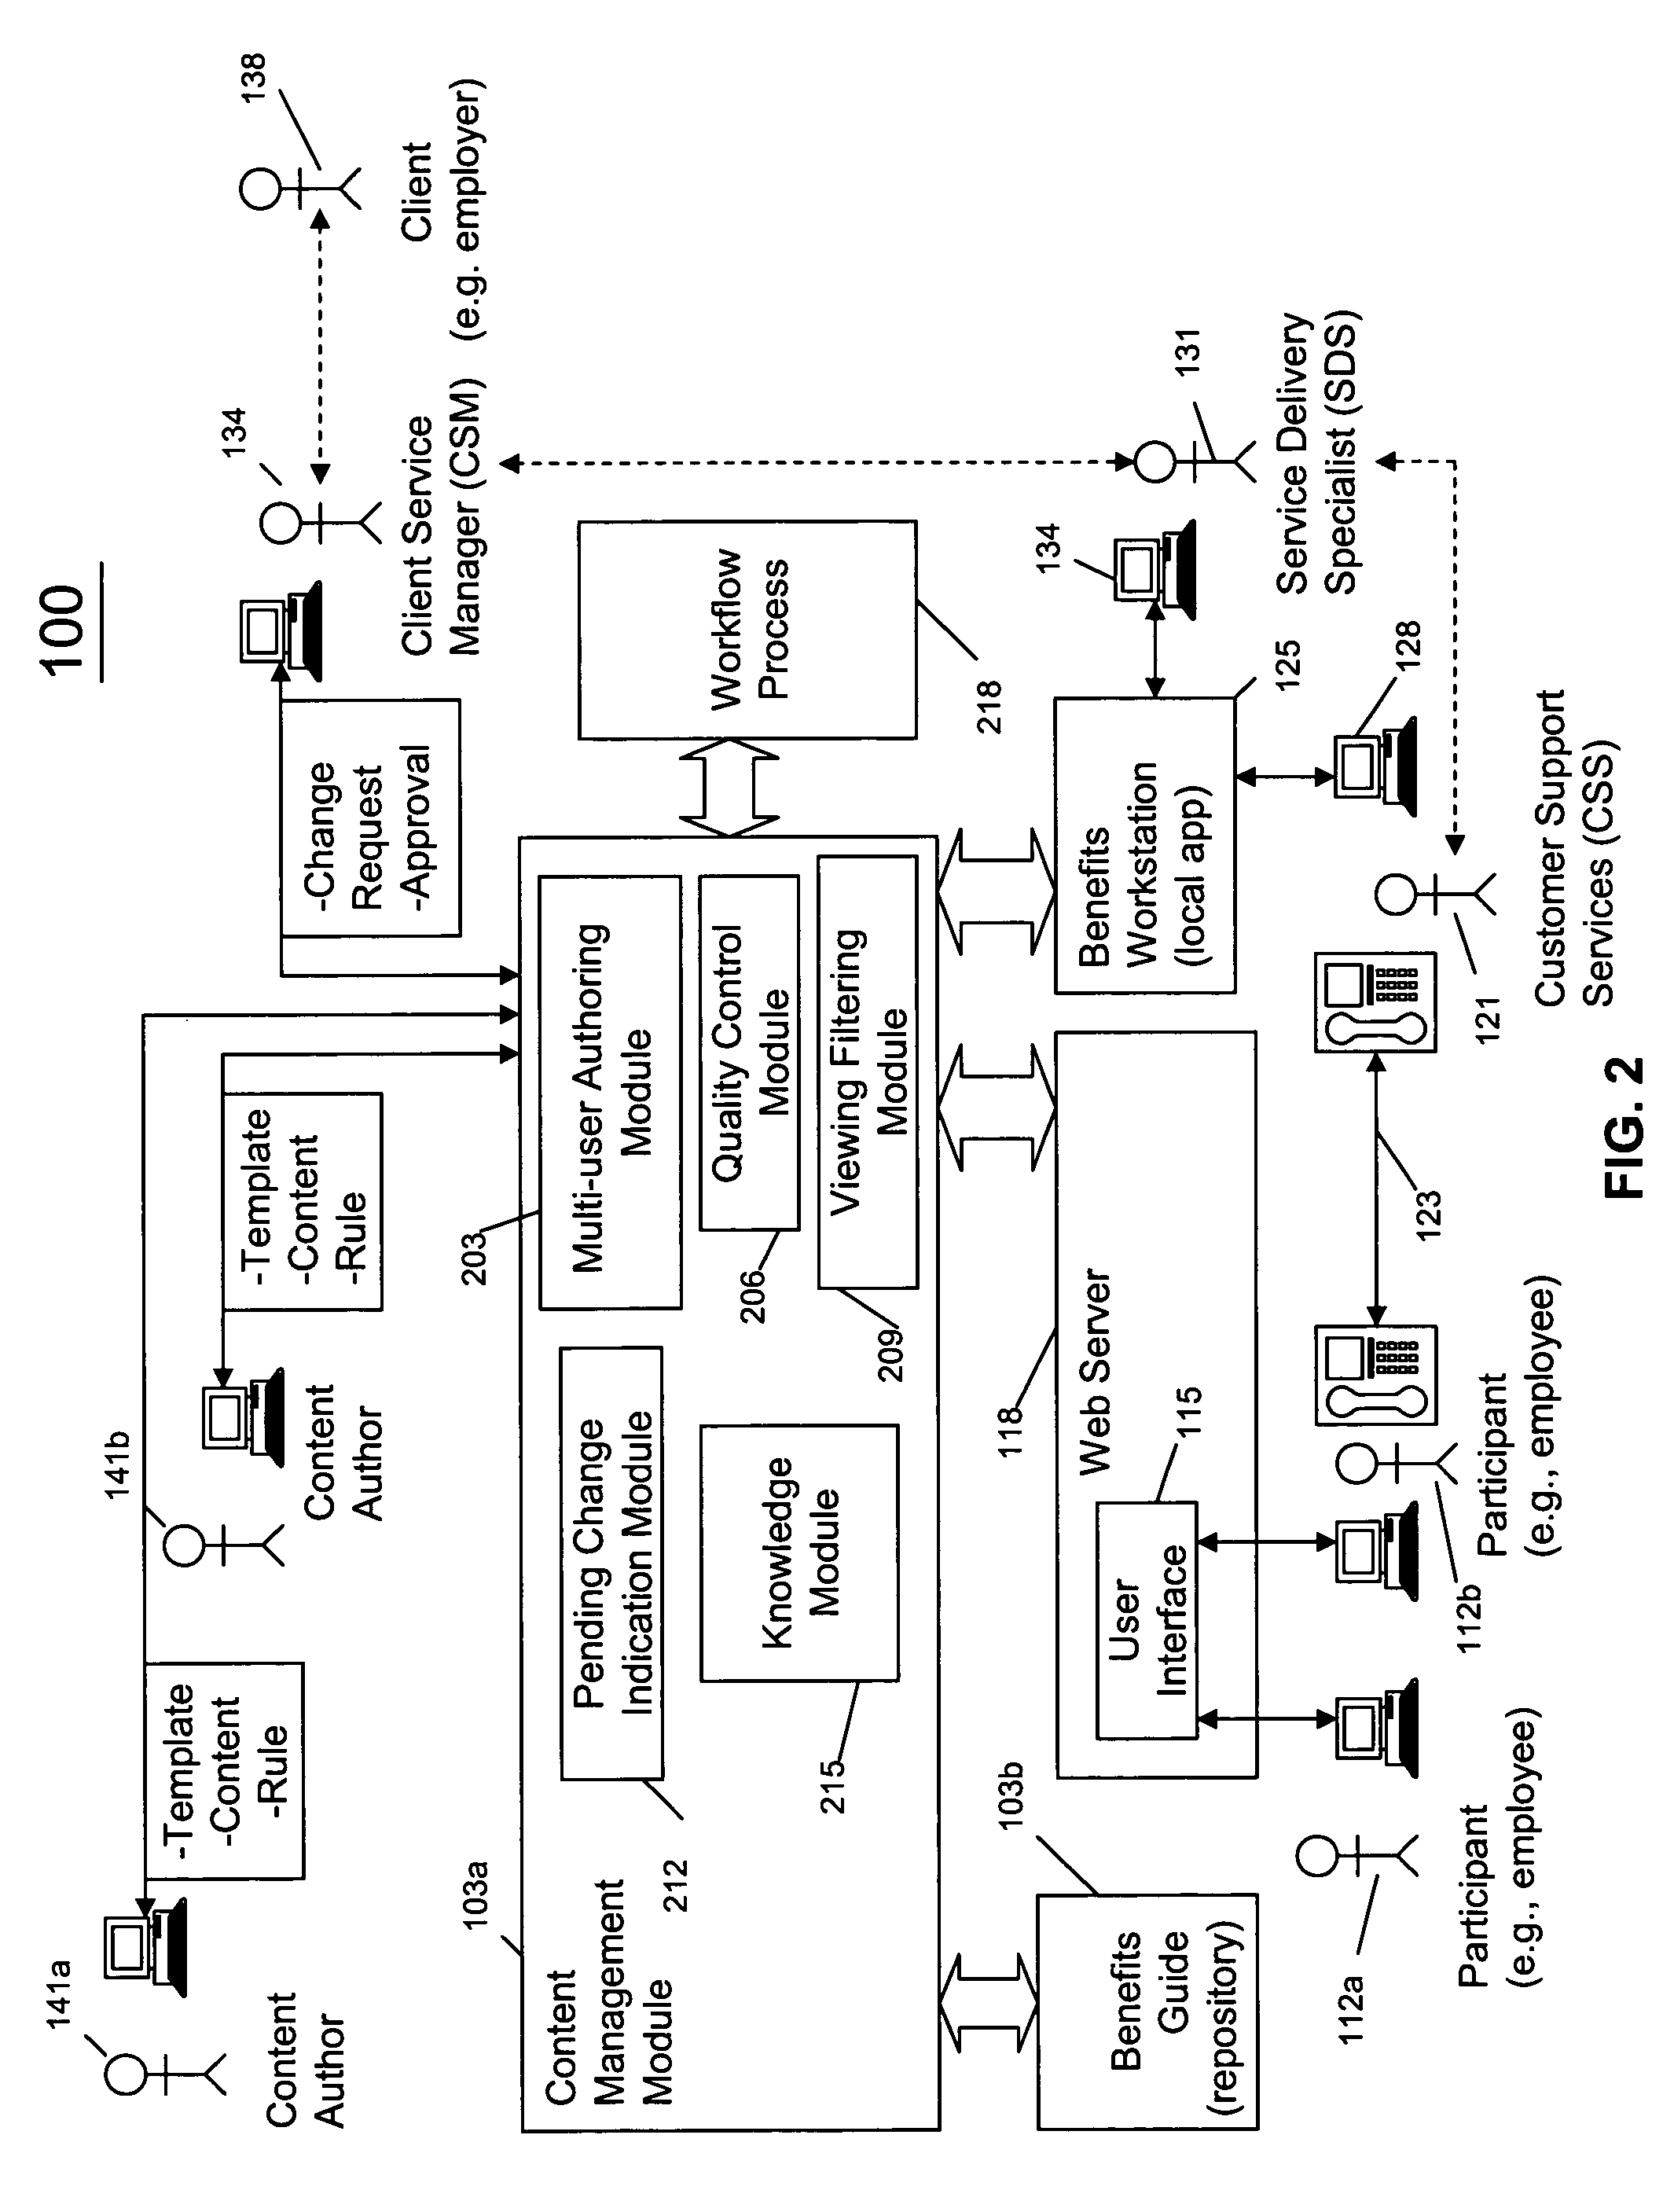 Multi-authoring within benefits content system